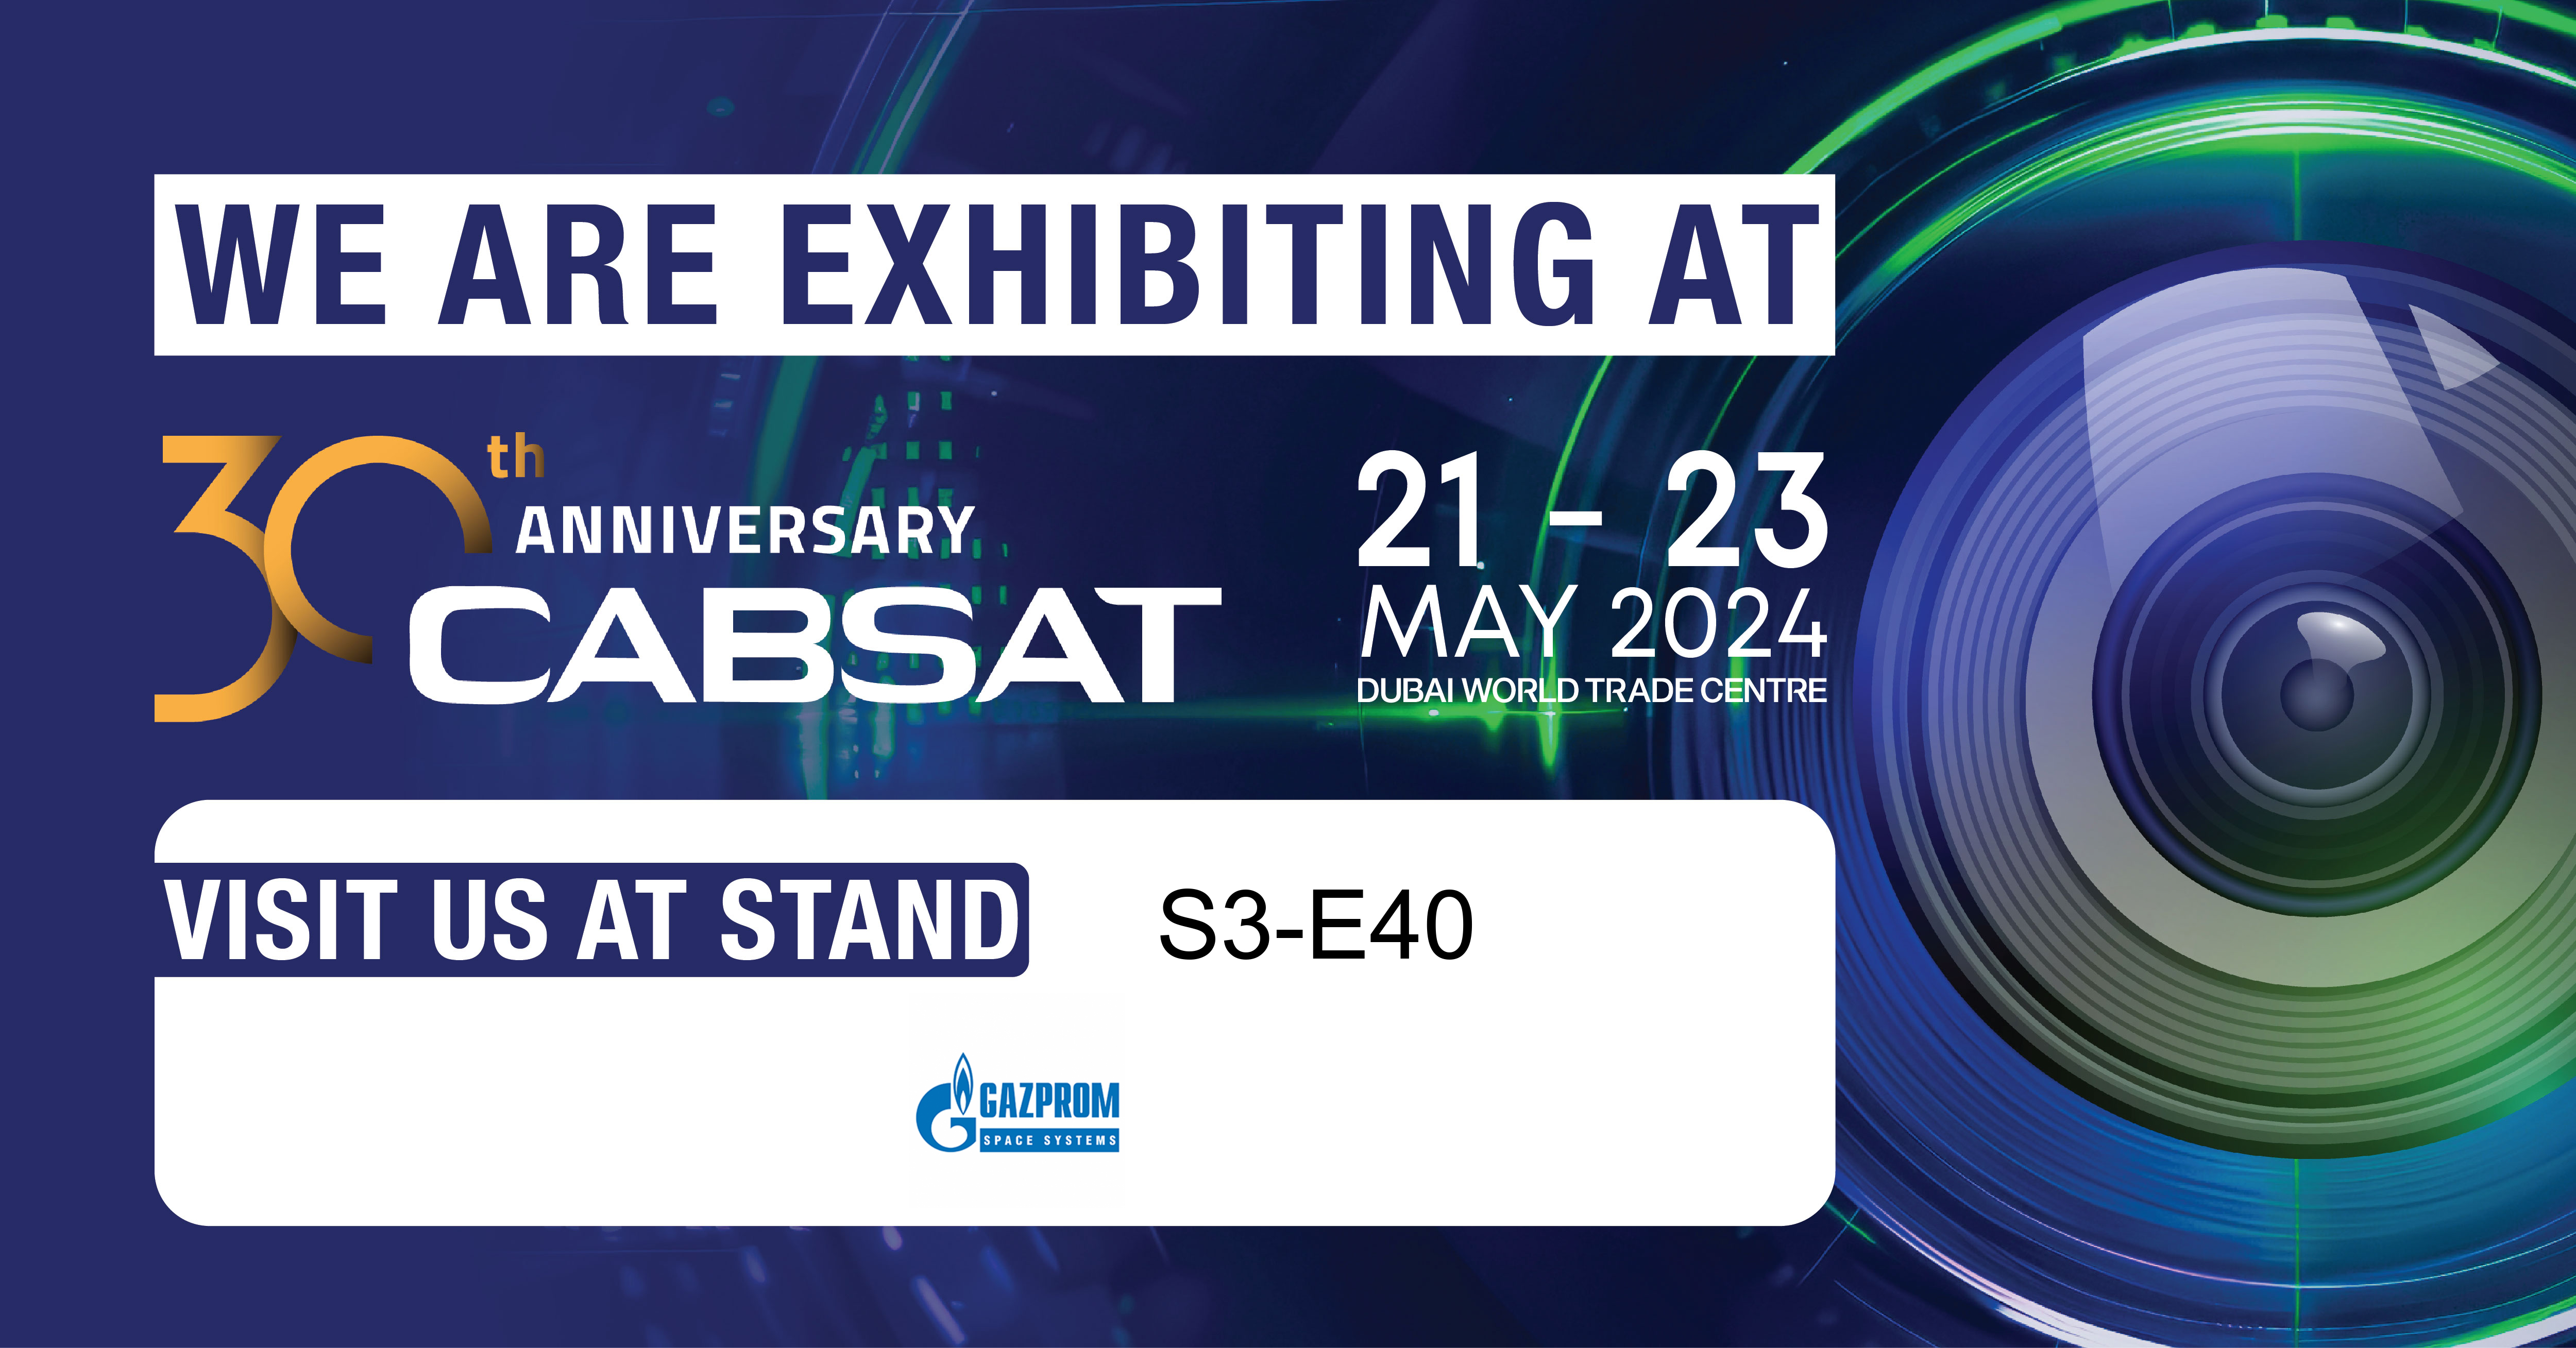 Gazprom Space Systems will take part in the CABSAT 2024 exhibition